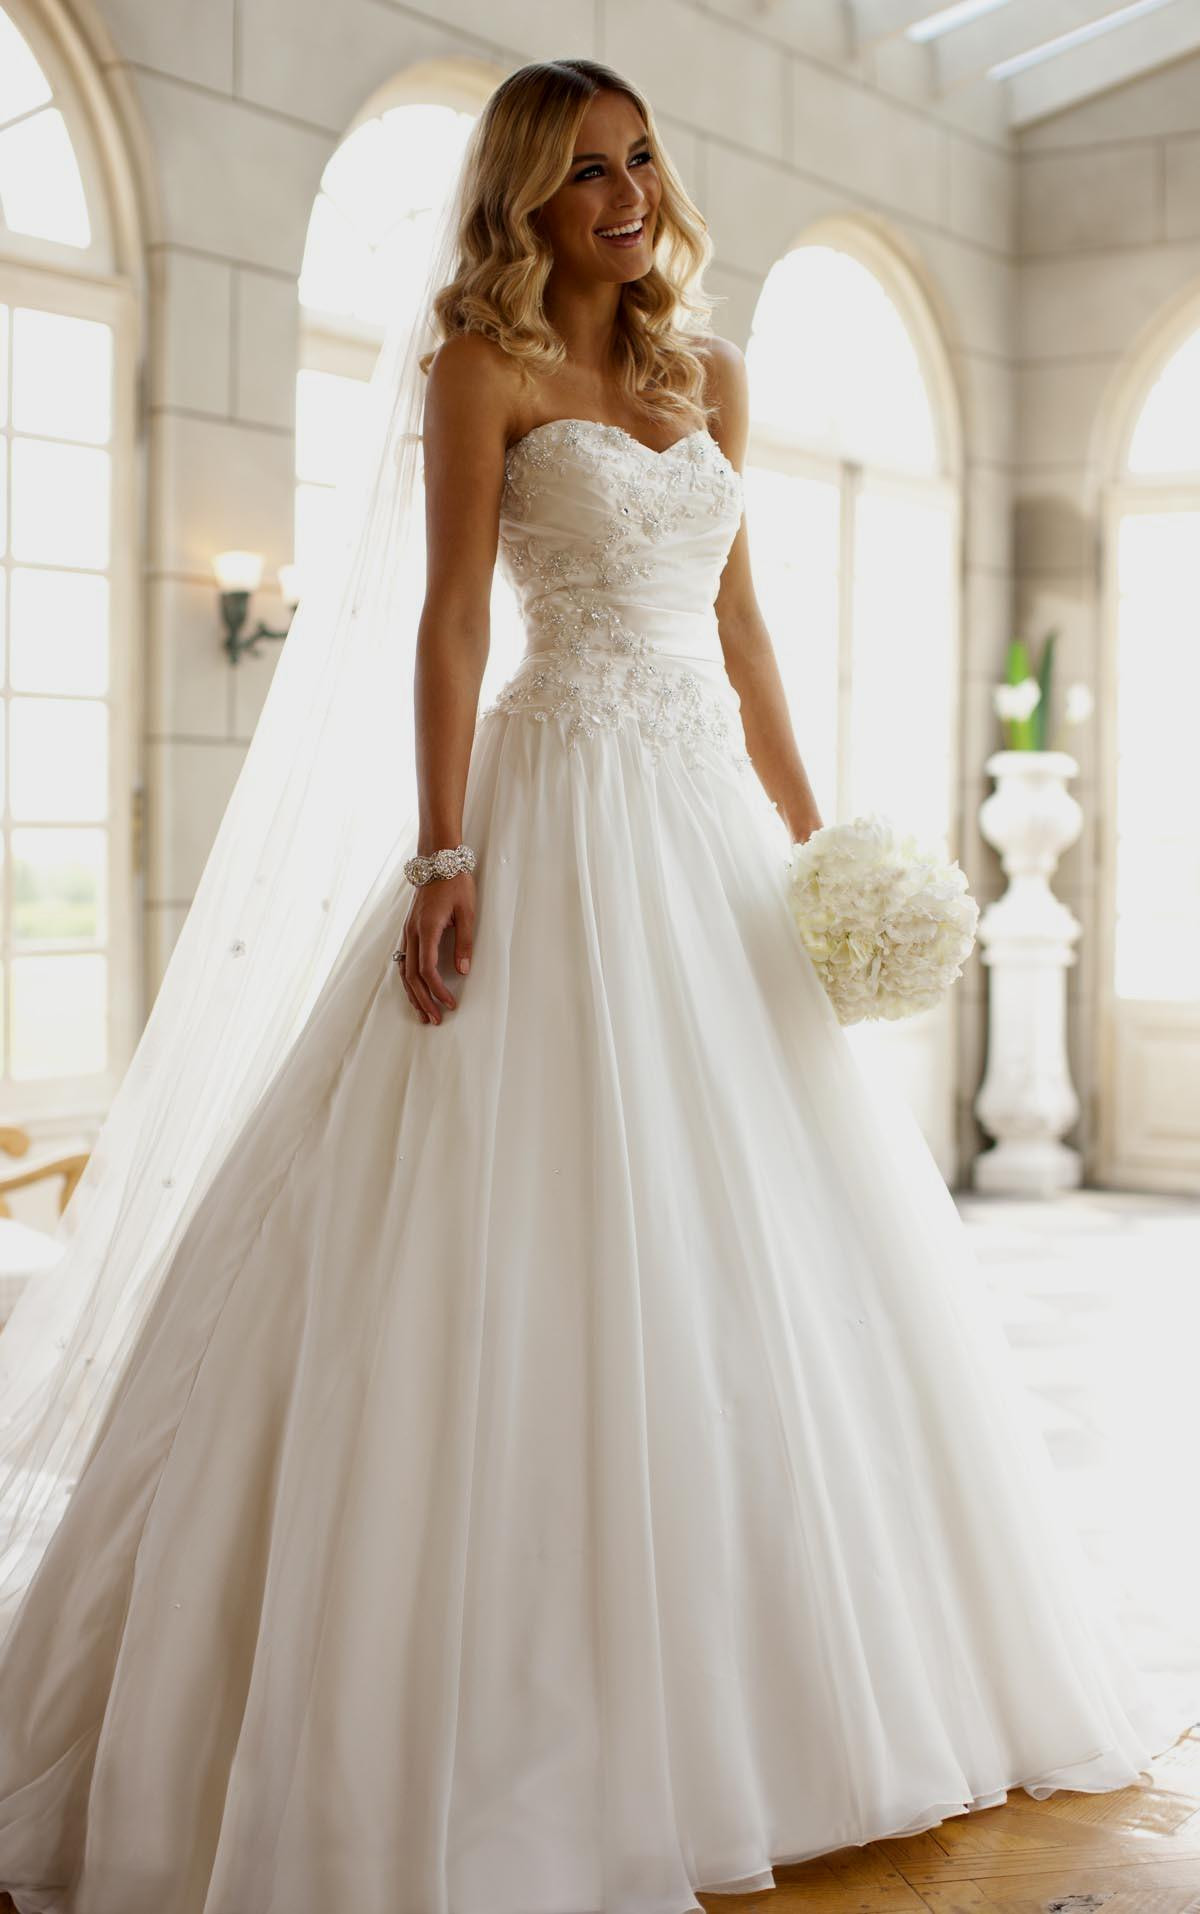 Strapless Wedding Gowns
 Who Can Wear Strapless Wedding Dresses